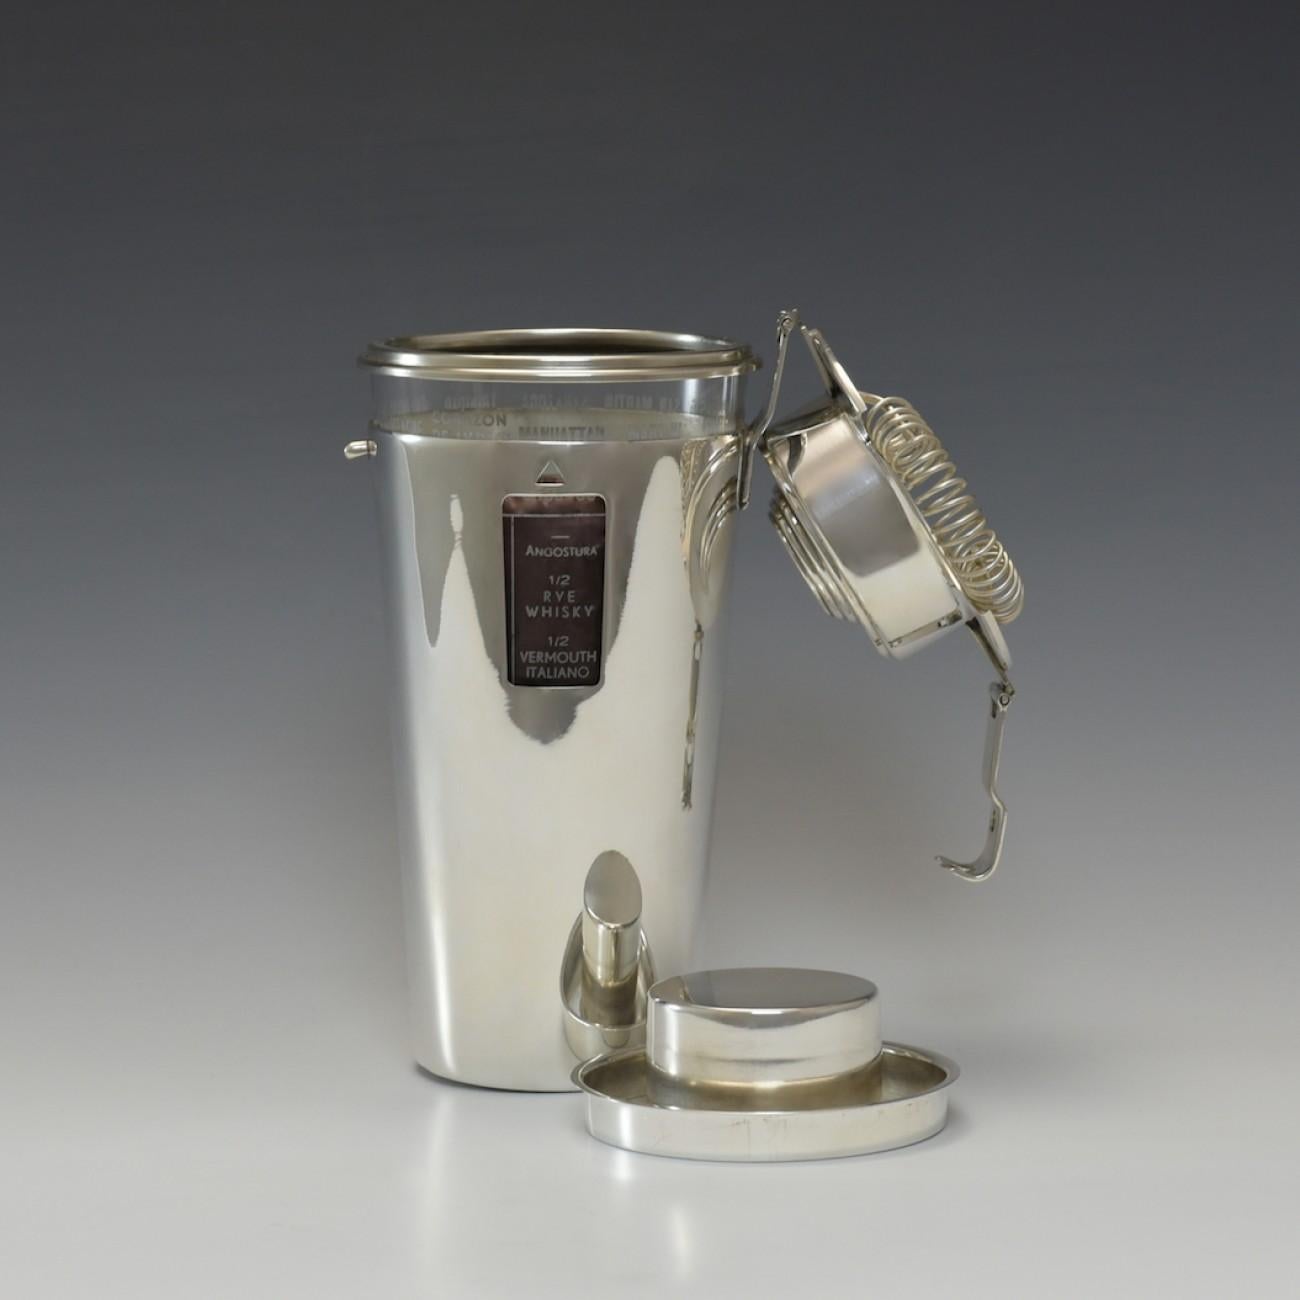 Silver plate and glass recipe cocktail shaker from the 1930s named 